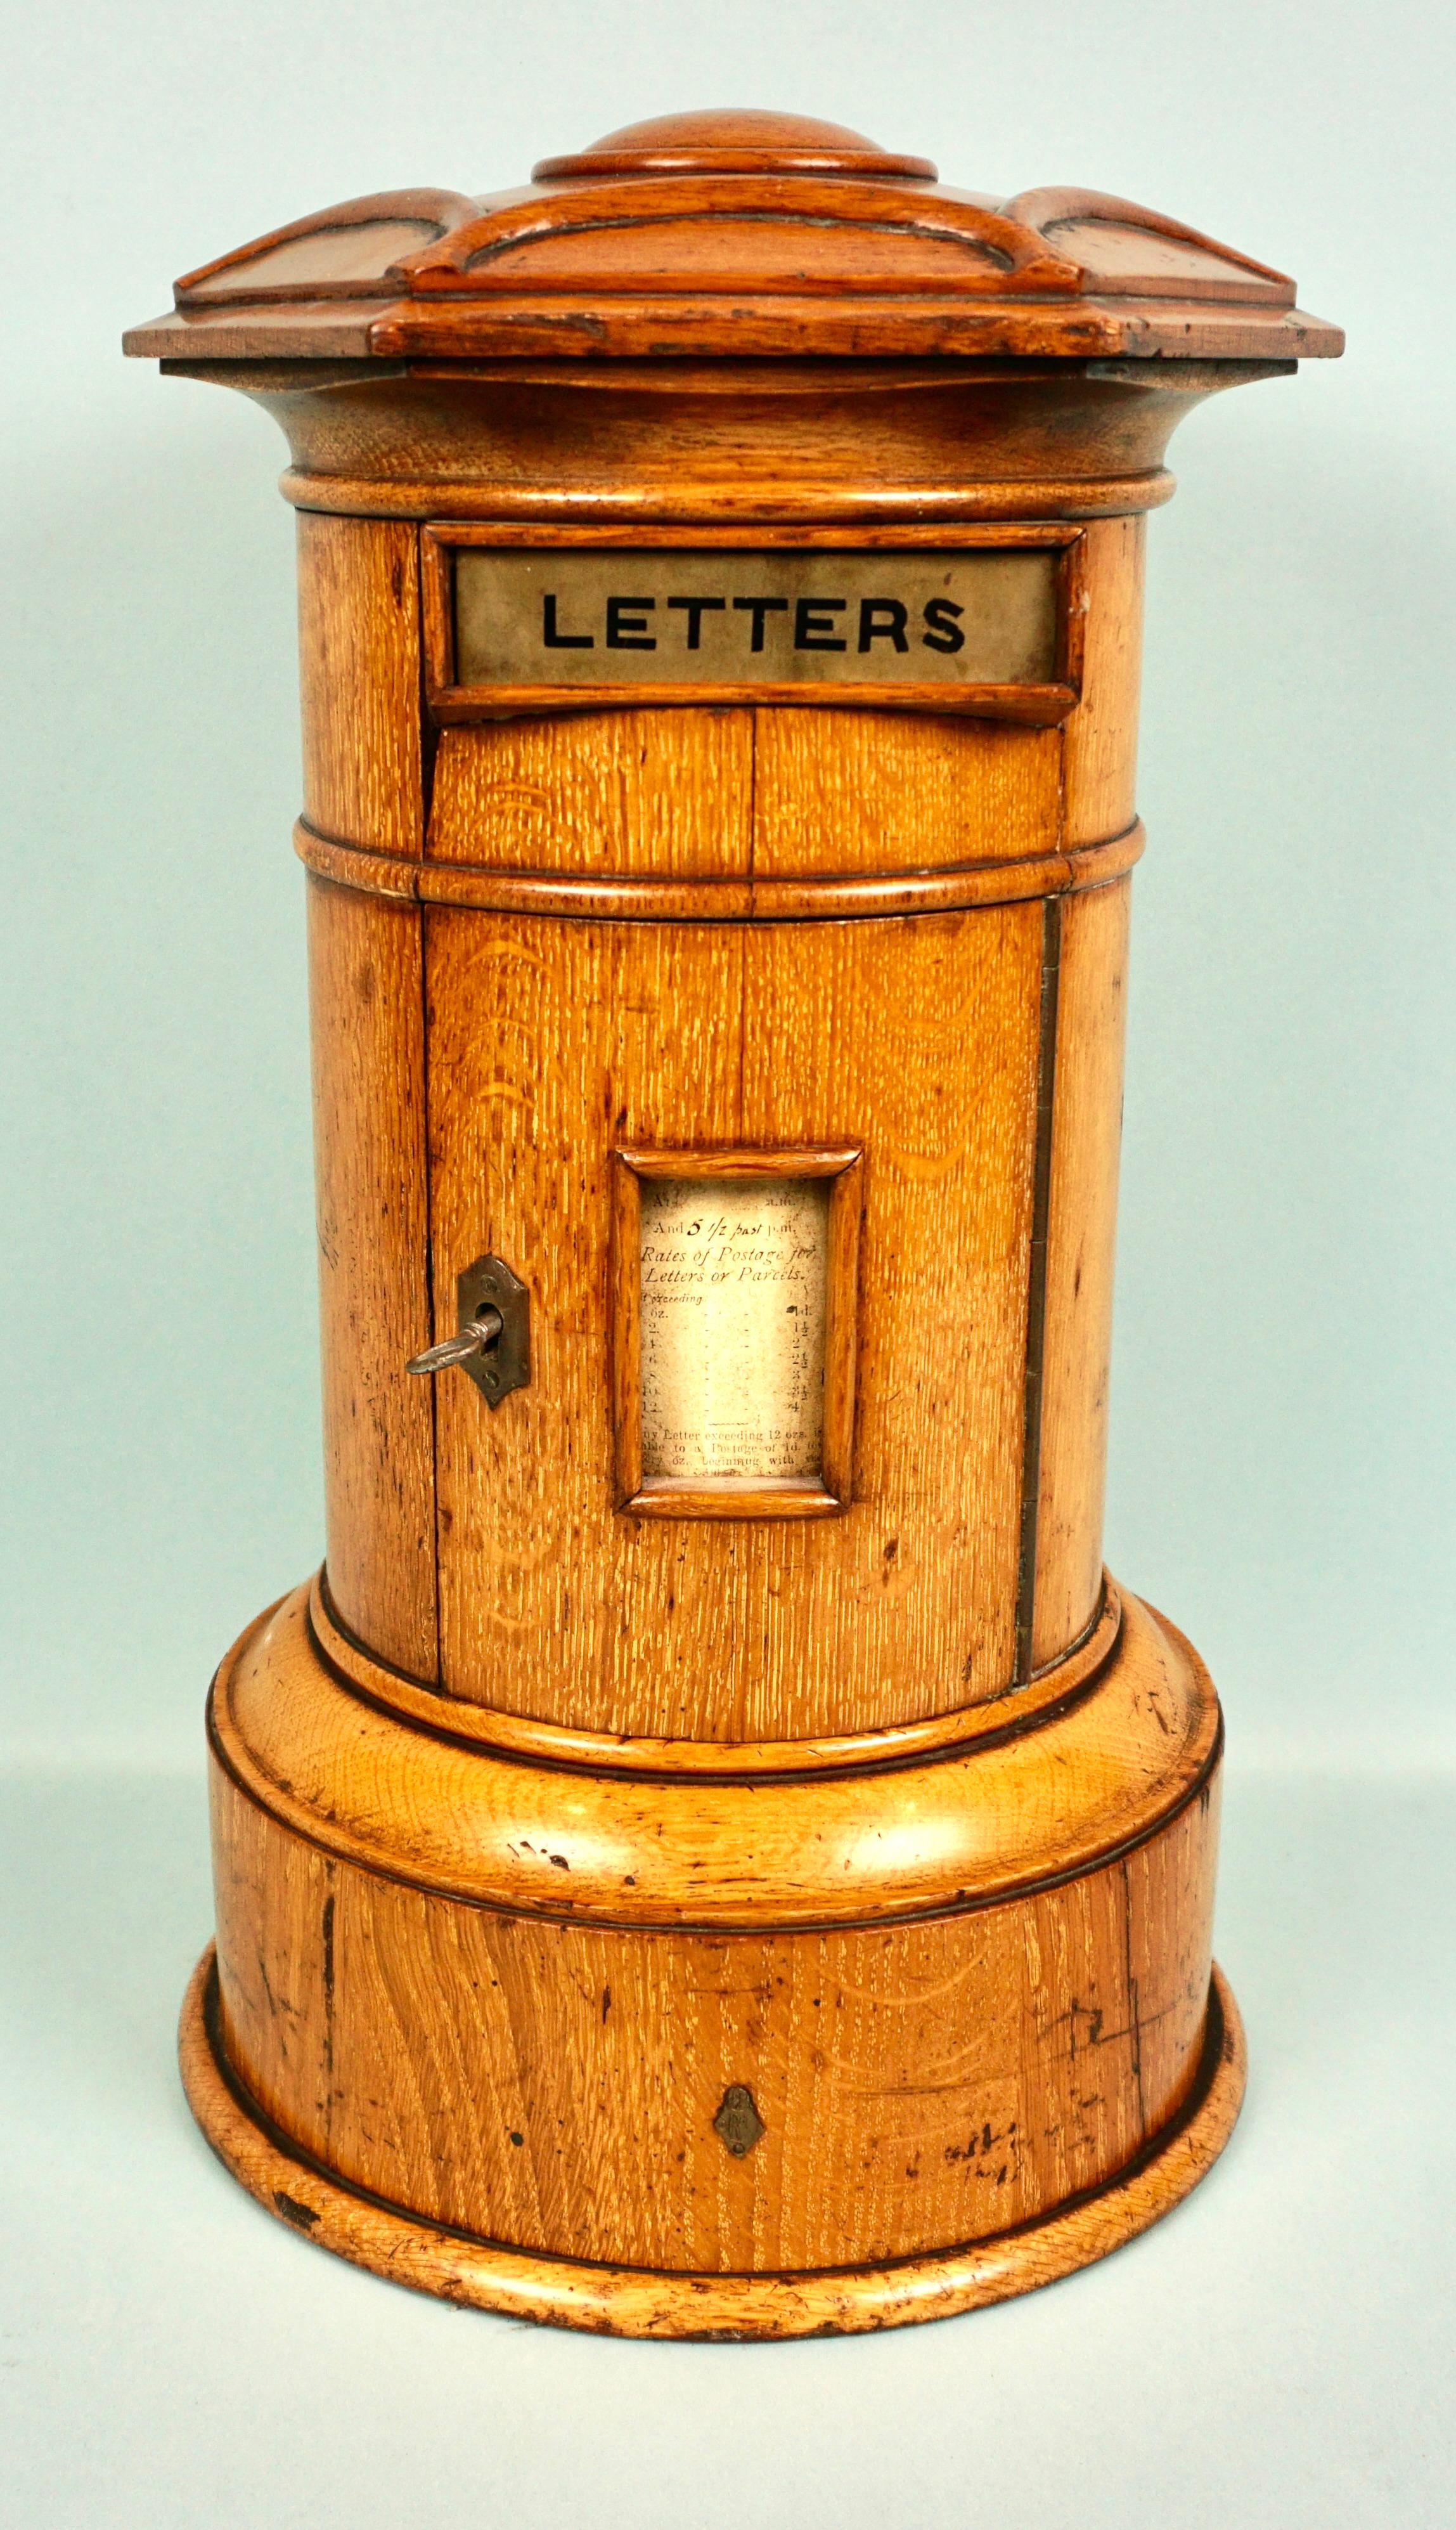 A rare English oak pillar form country house letter box with a circular base and cylindrical body ending in a carved hexagonal lid with a domed top. The front is fitted with a brass opening marked letters, below is a handwritten schedule of pickup